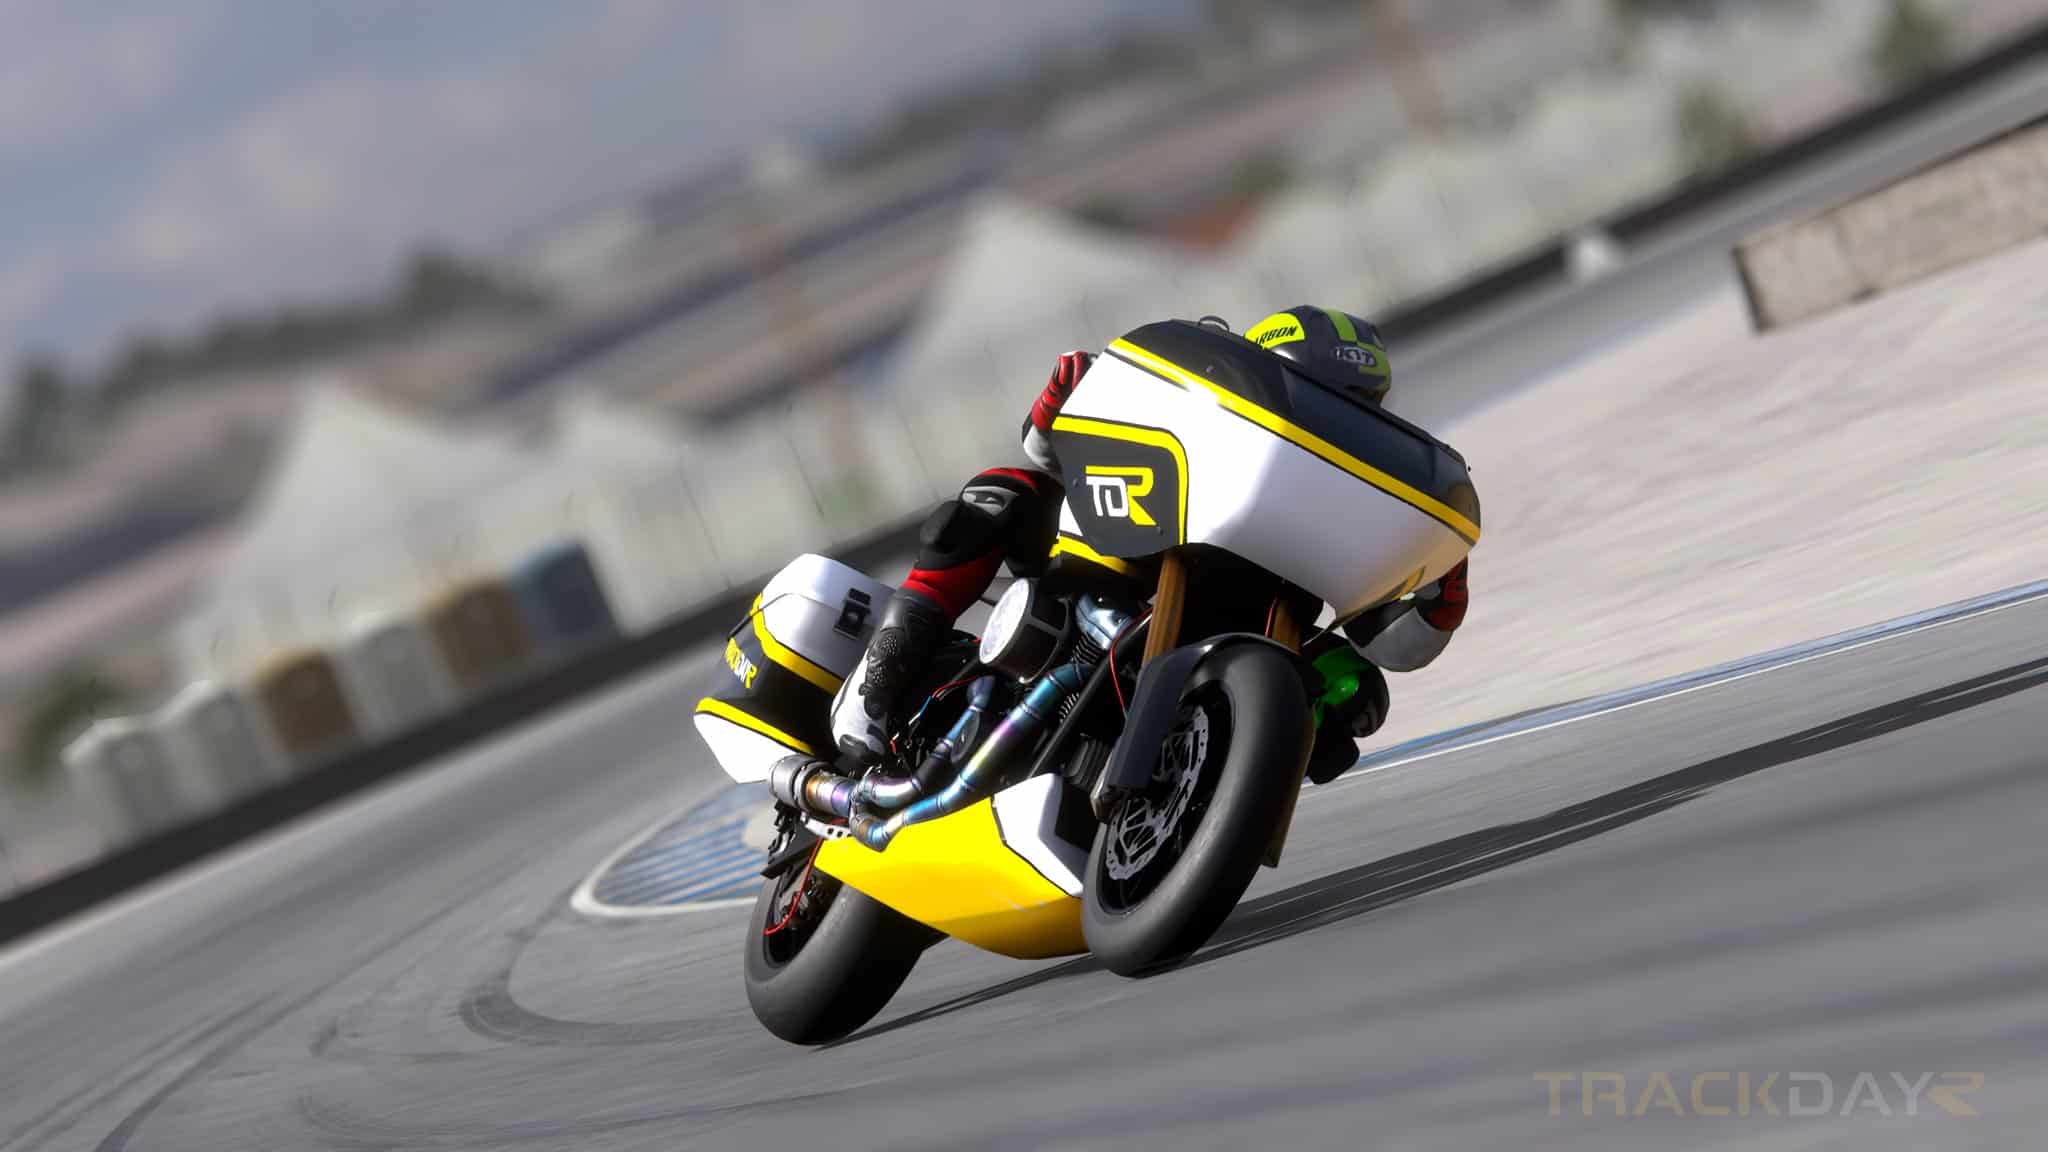 American Big Twins and new physics arrive in TrackDayR